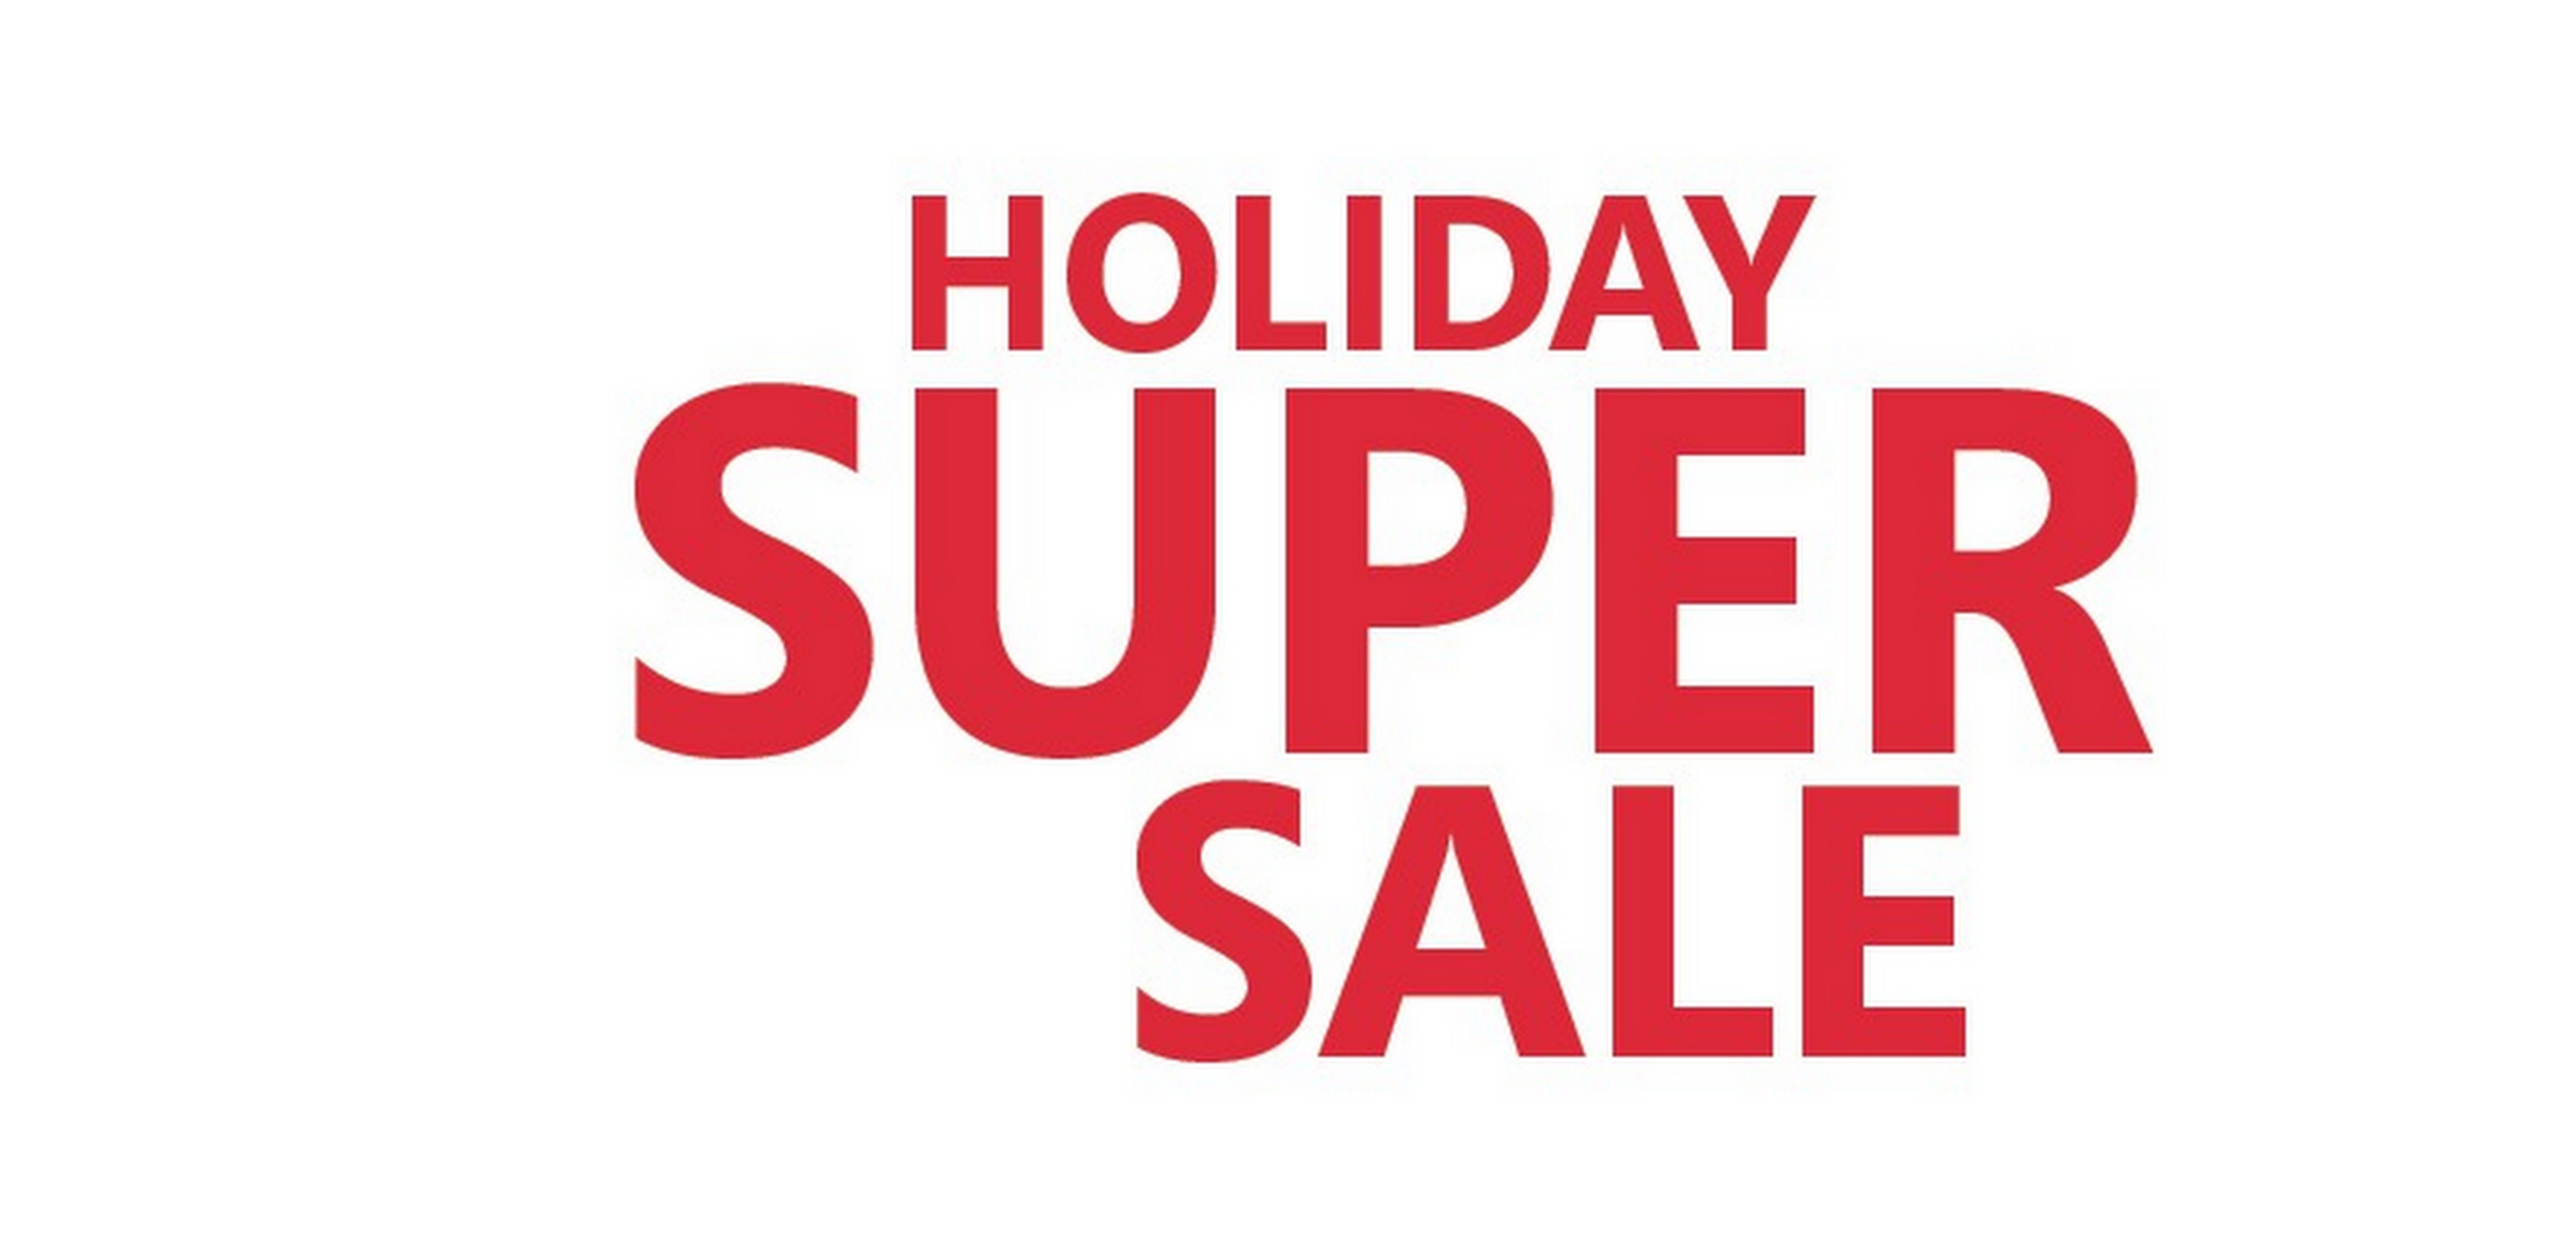 Turn up the joy and save big with the Microsoft Store Holiday Super Sale